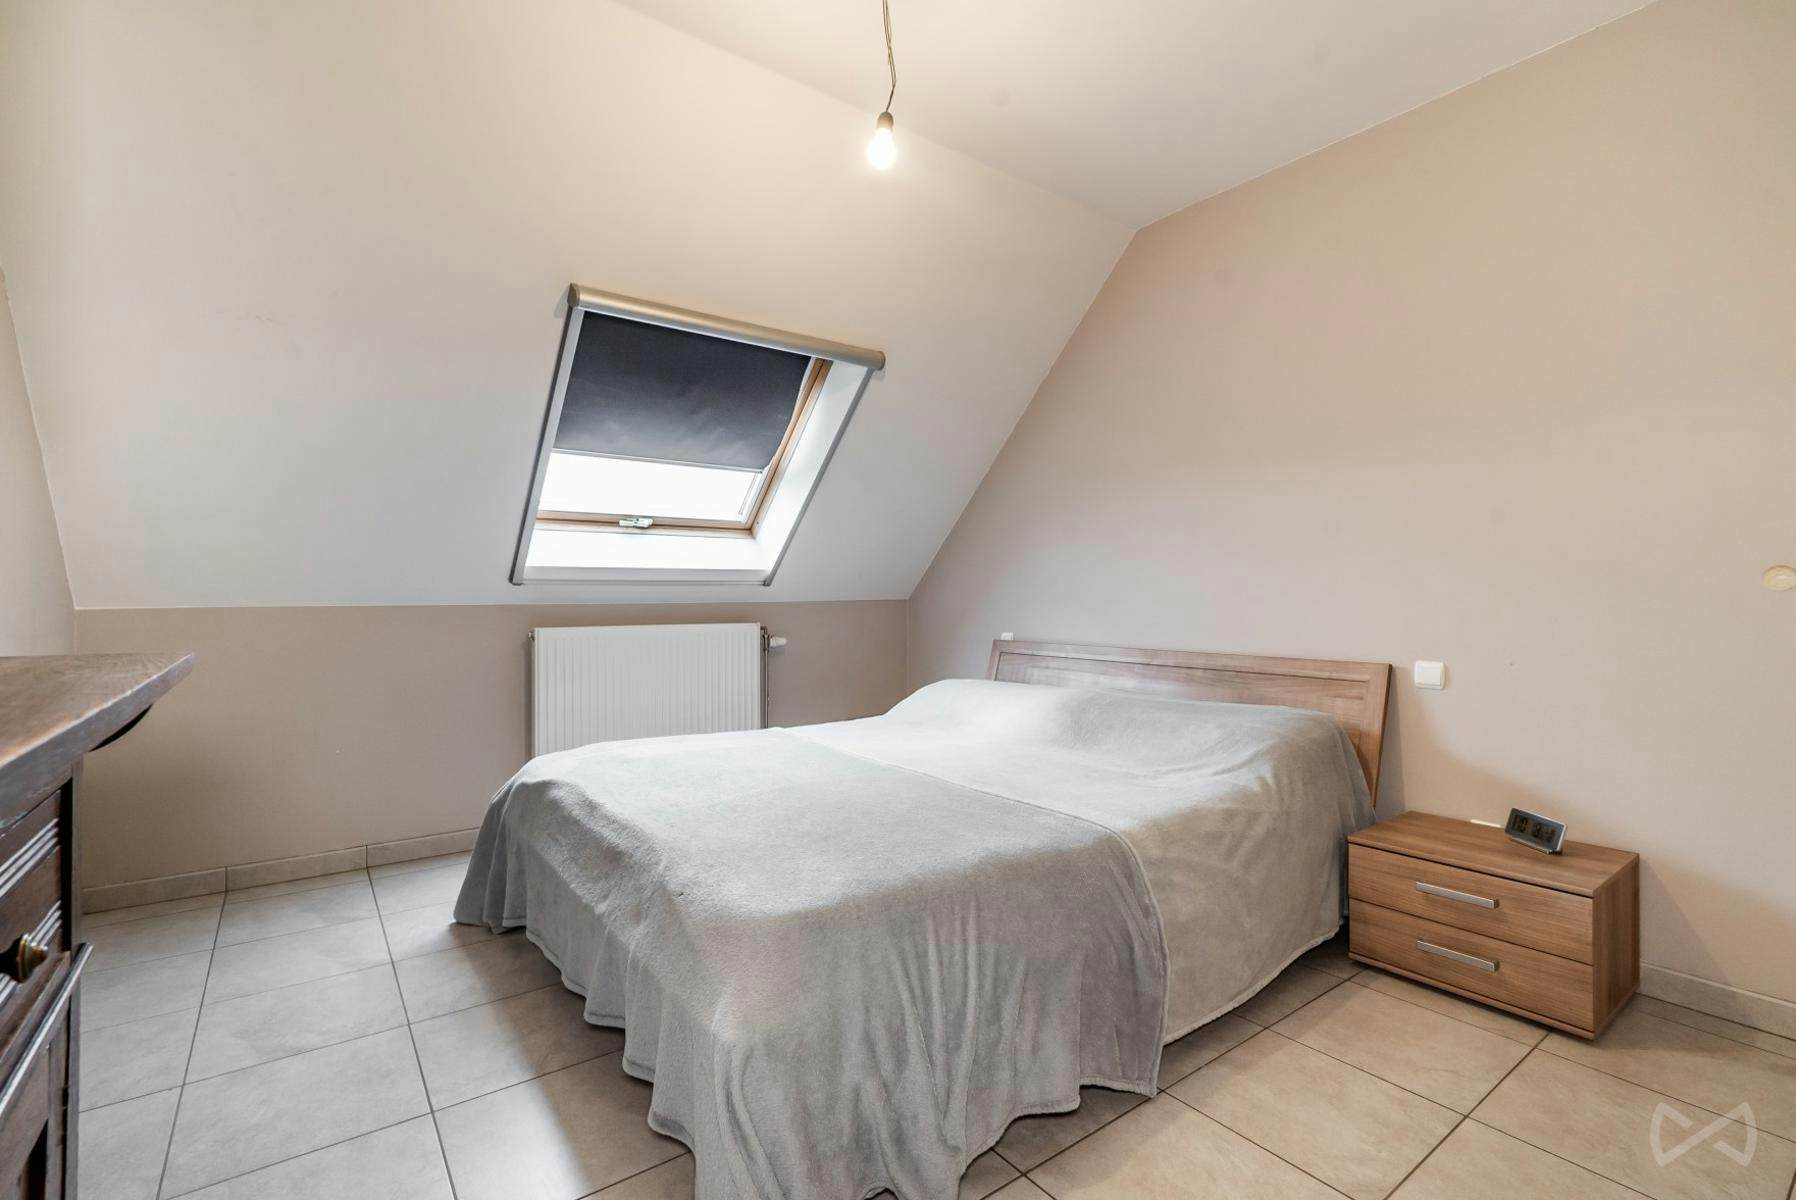 Picture 2 of 4 for Flat with four bedrooms in Leuze-en-hainaut